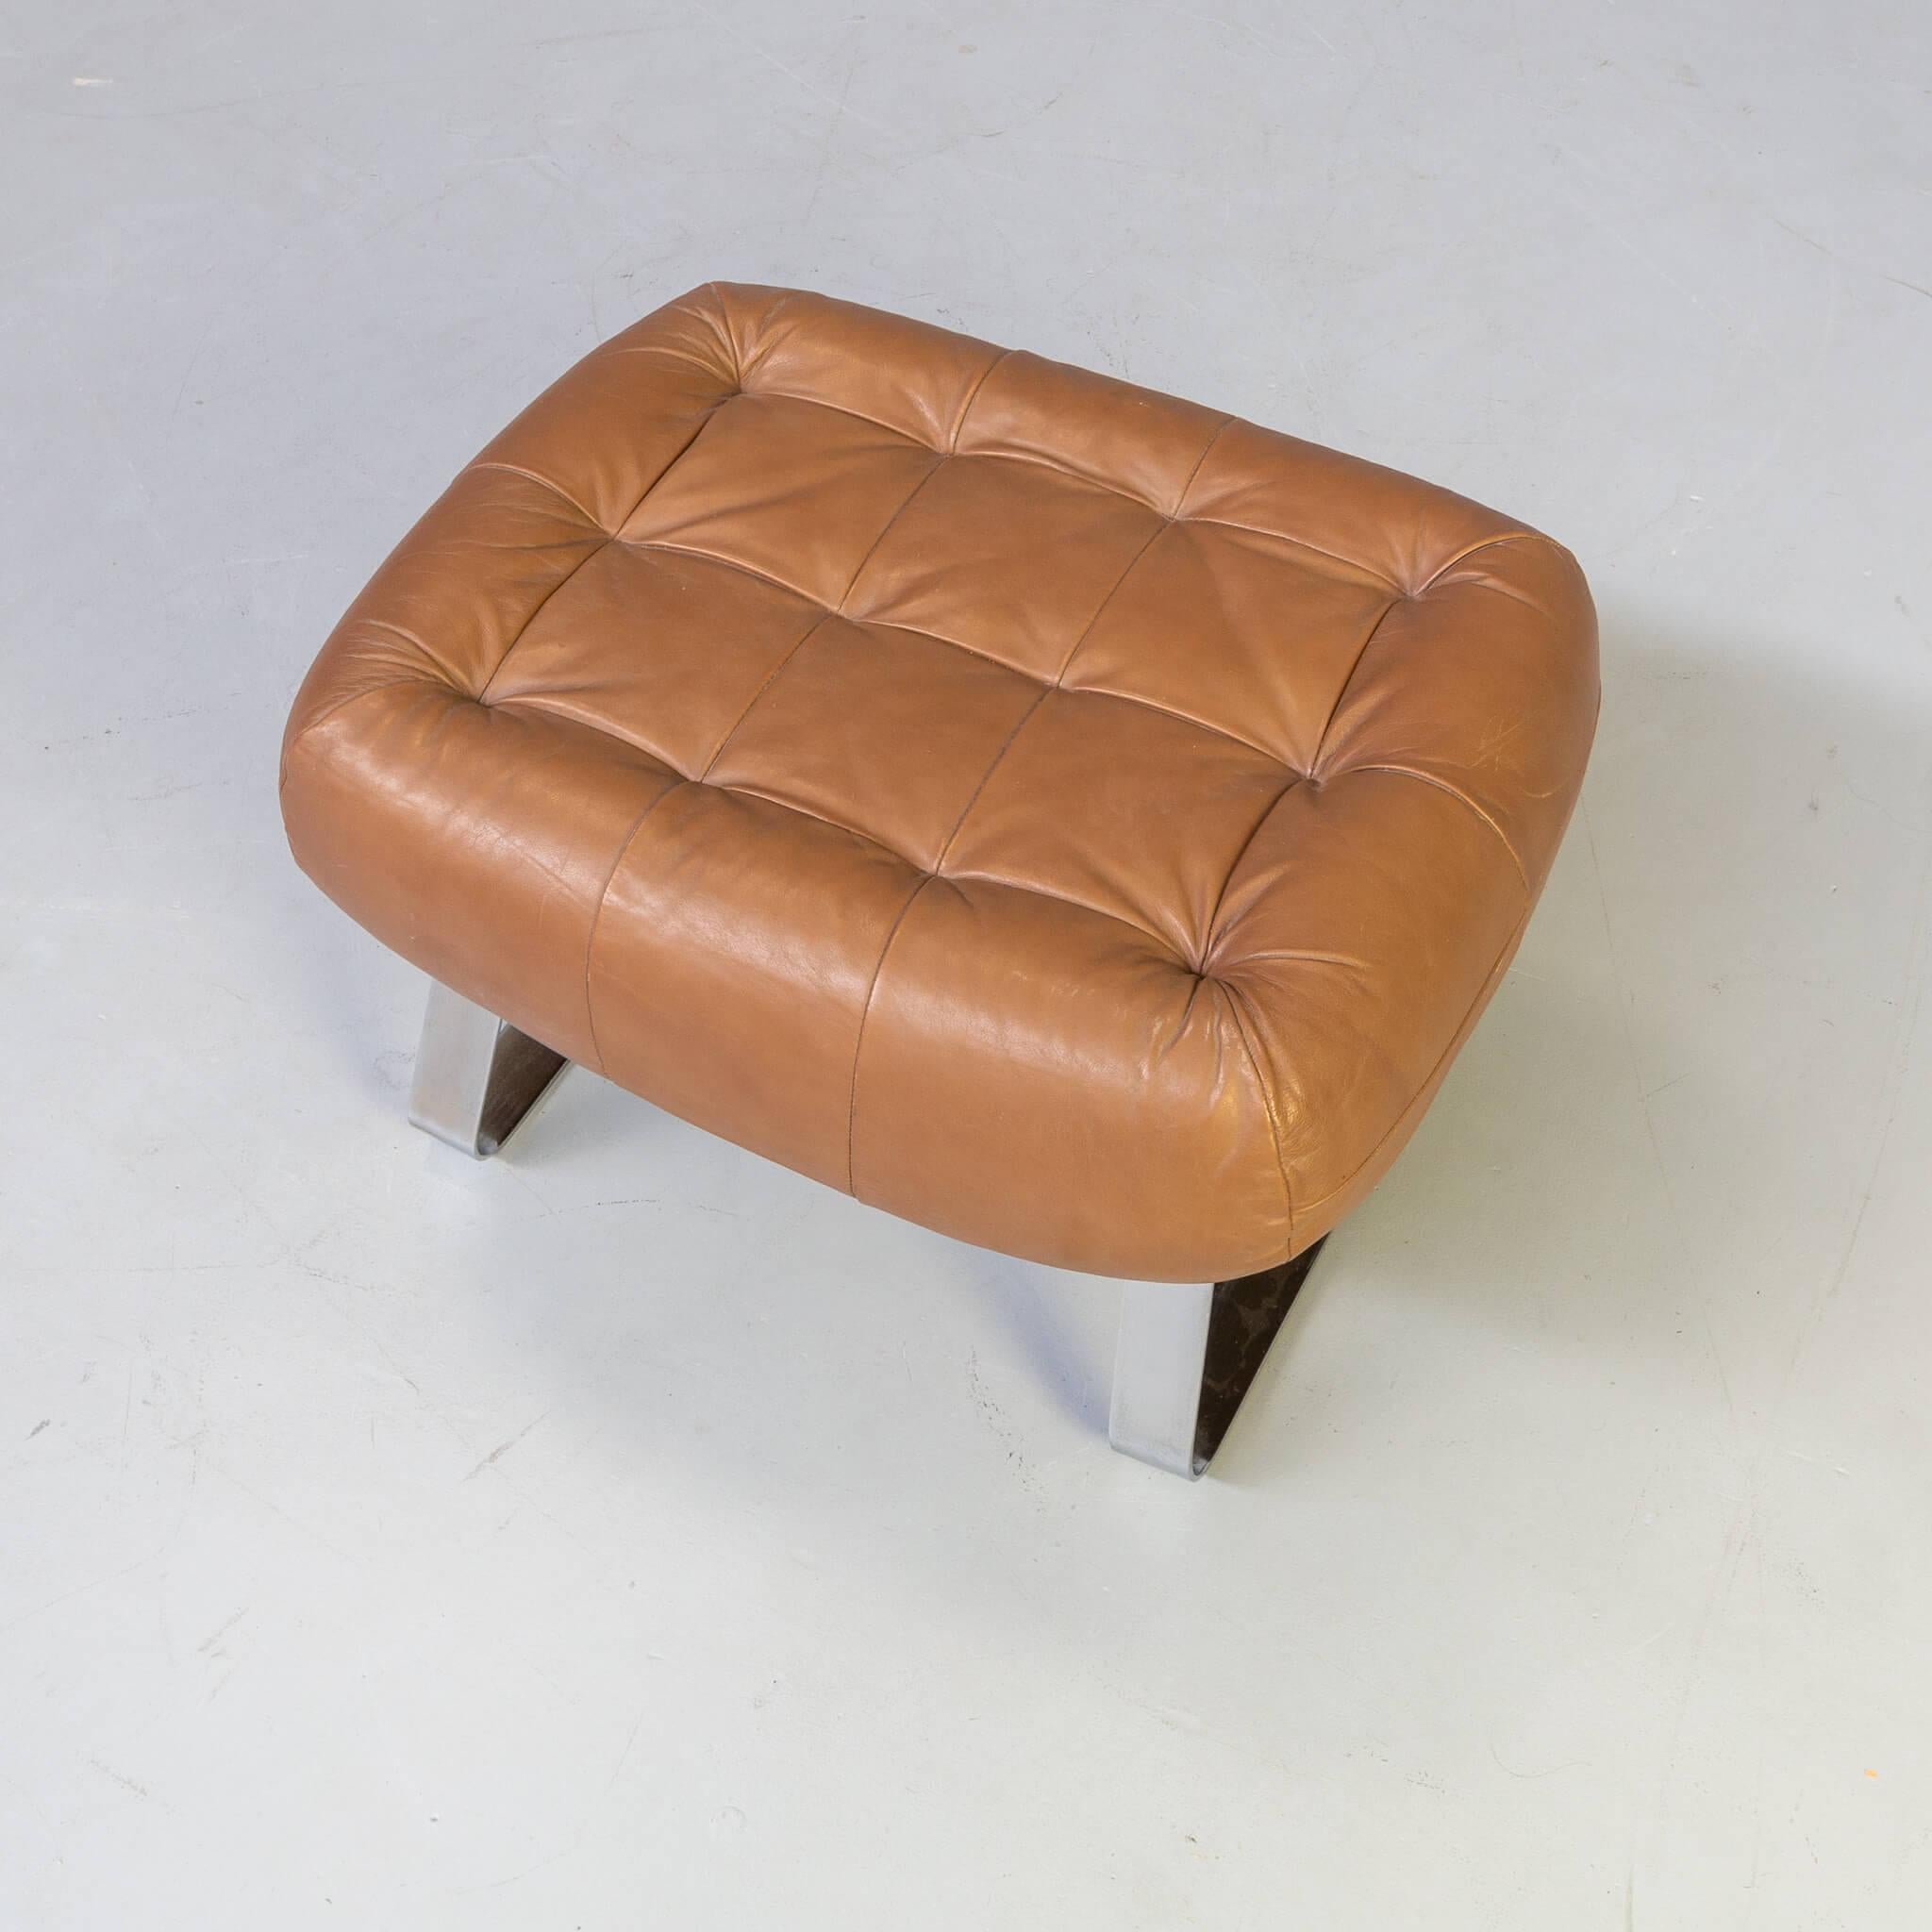 70s Percival Lafer “Earth Chair” Collection Lounge Fauteuil and Hocker For Sale 1